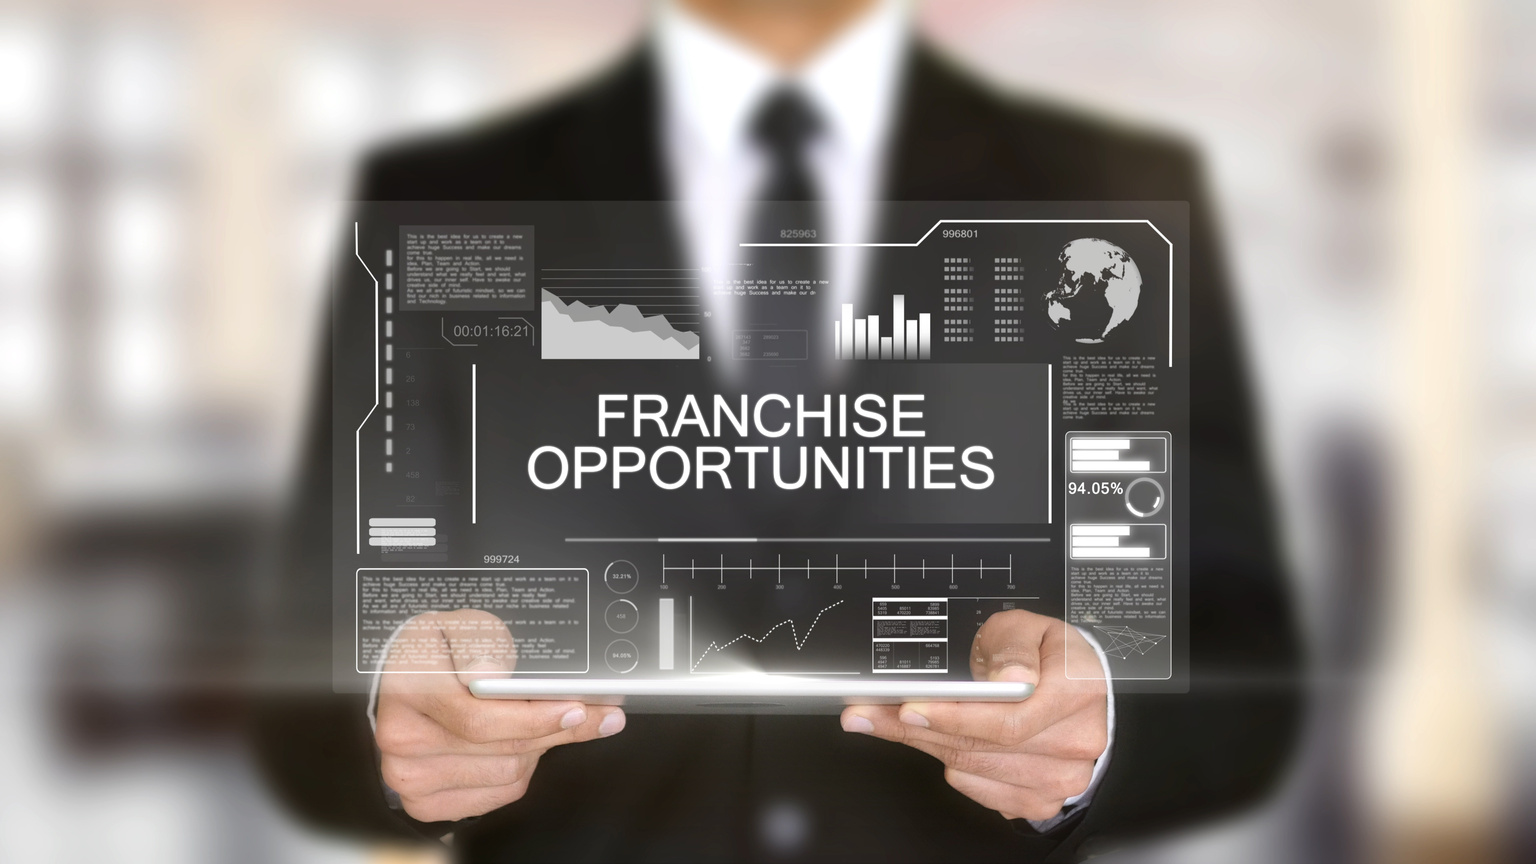 Franchise Opportunities, Hologram Futuristic Interface, Augmented Virtual